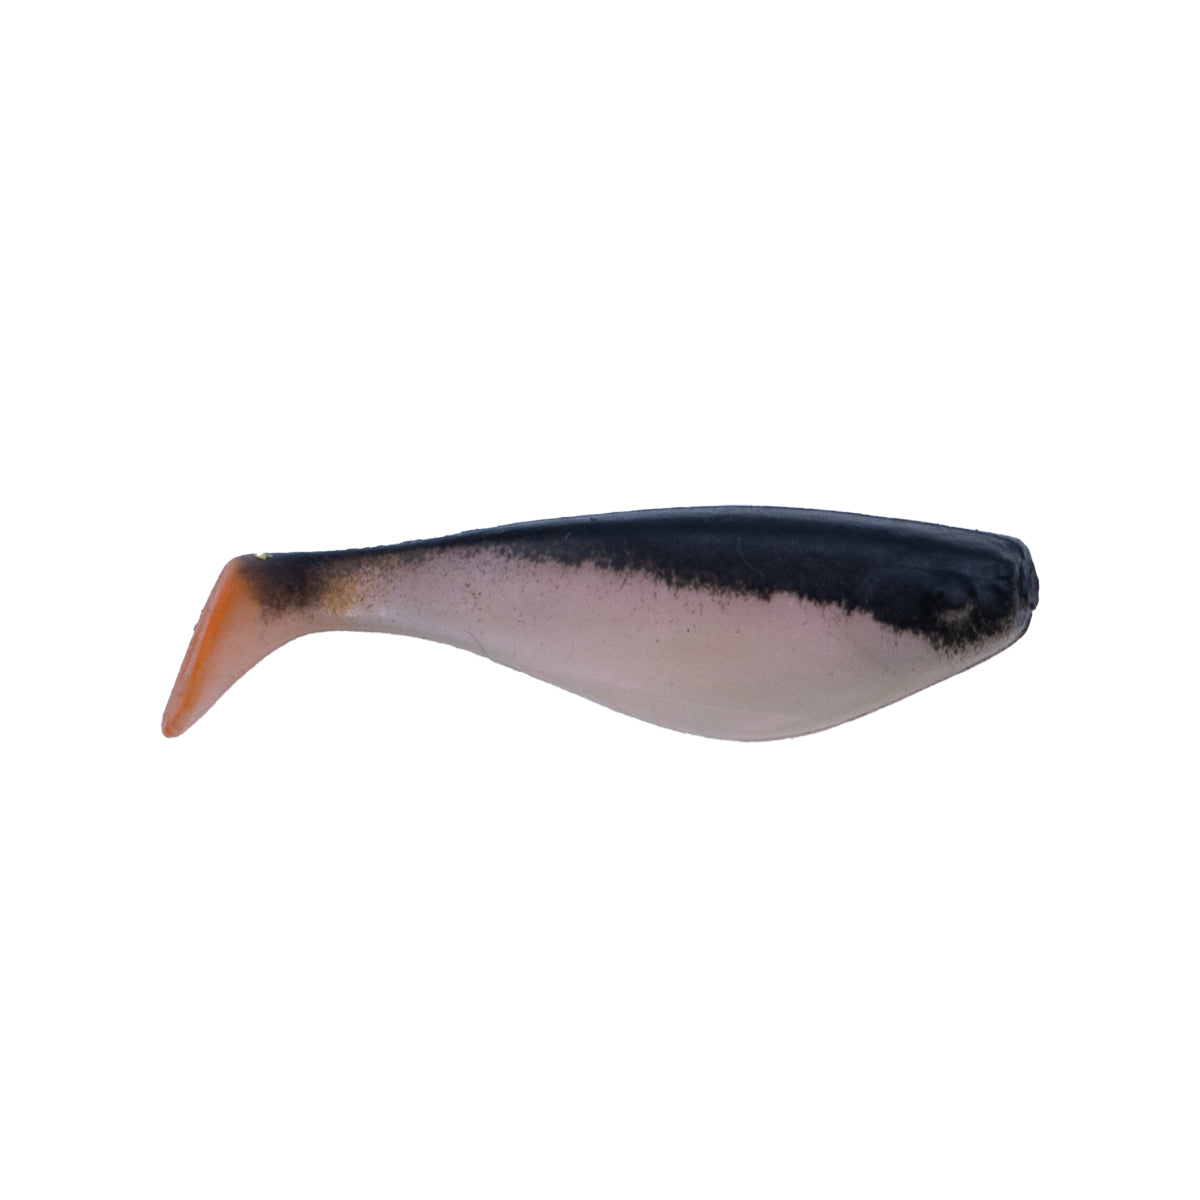 Huntin' Shad, Pack of 10